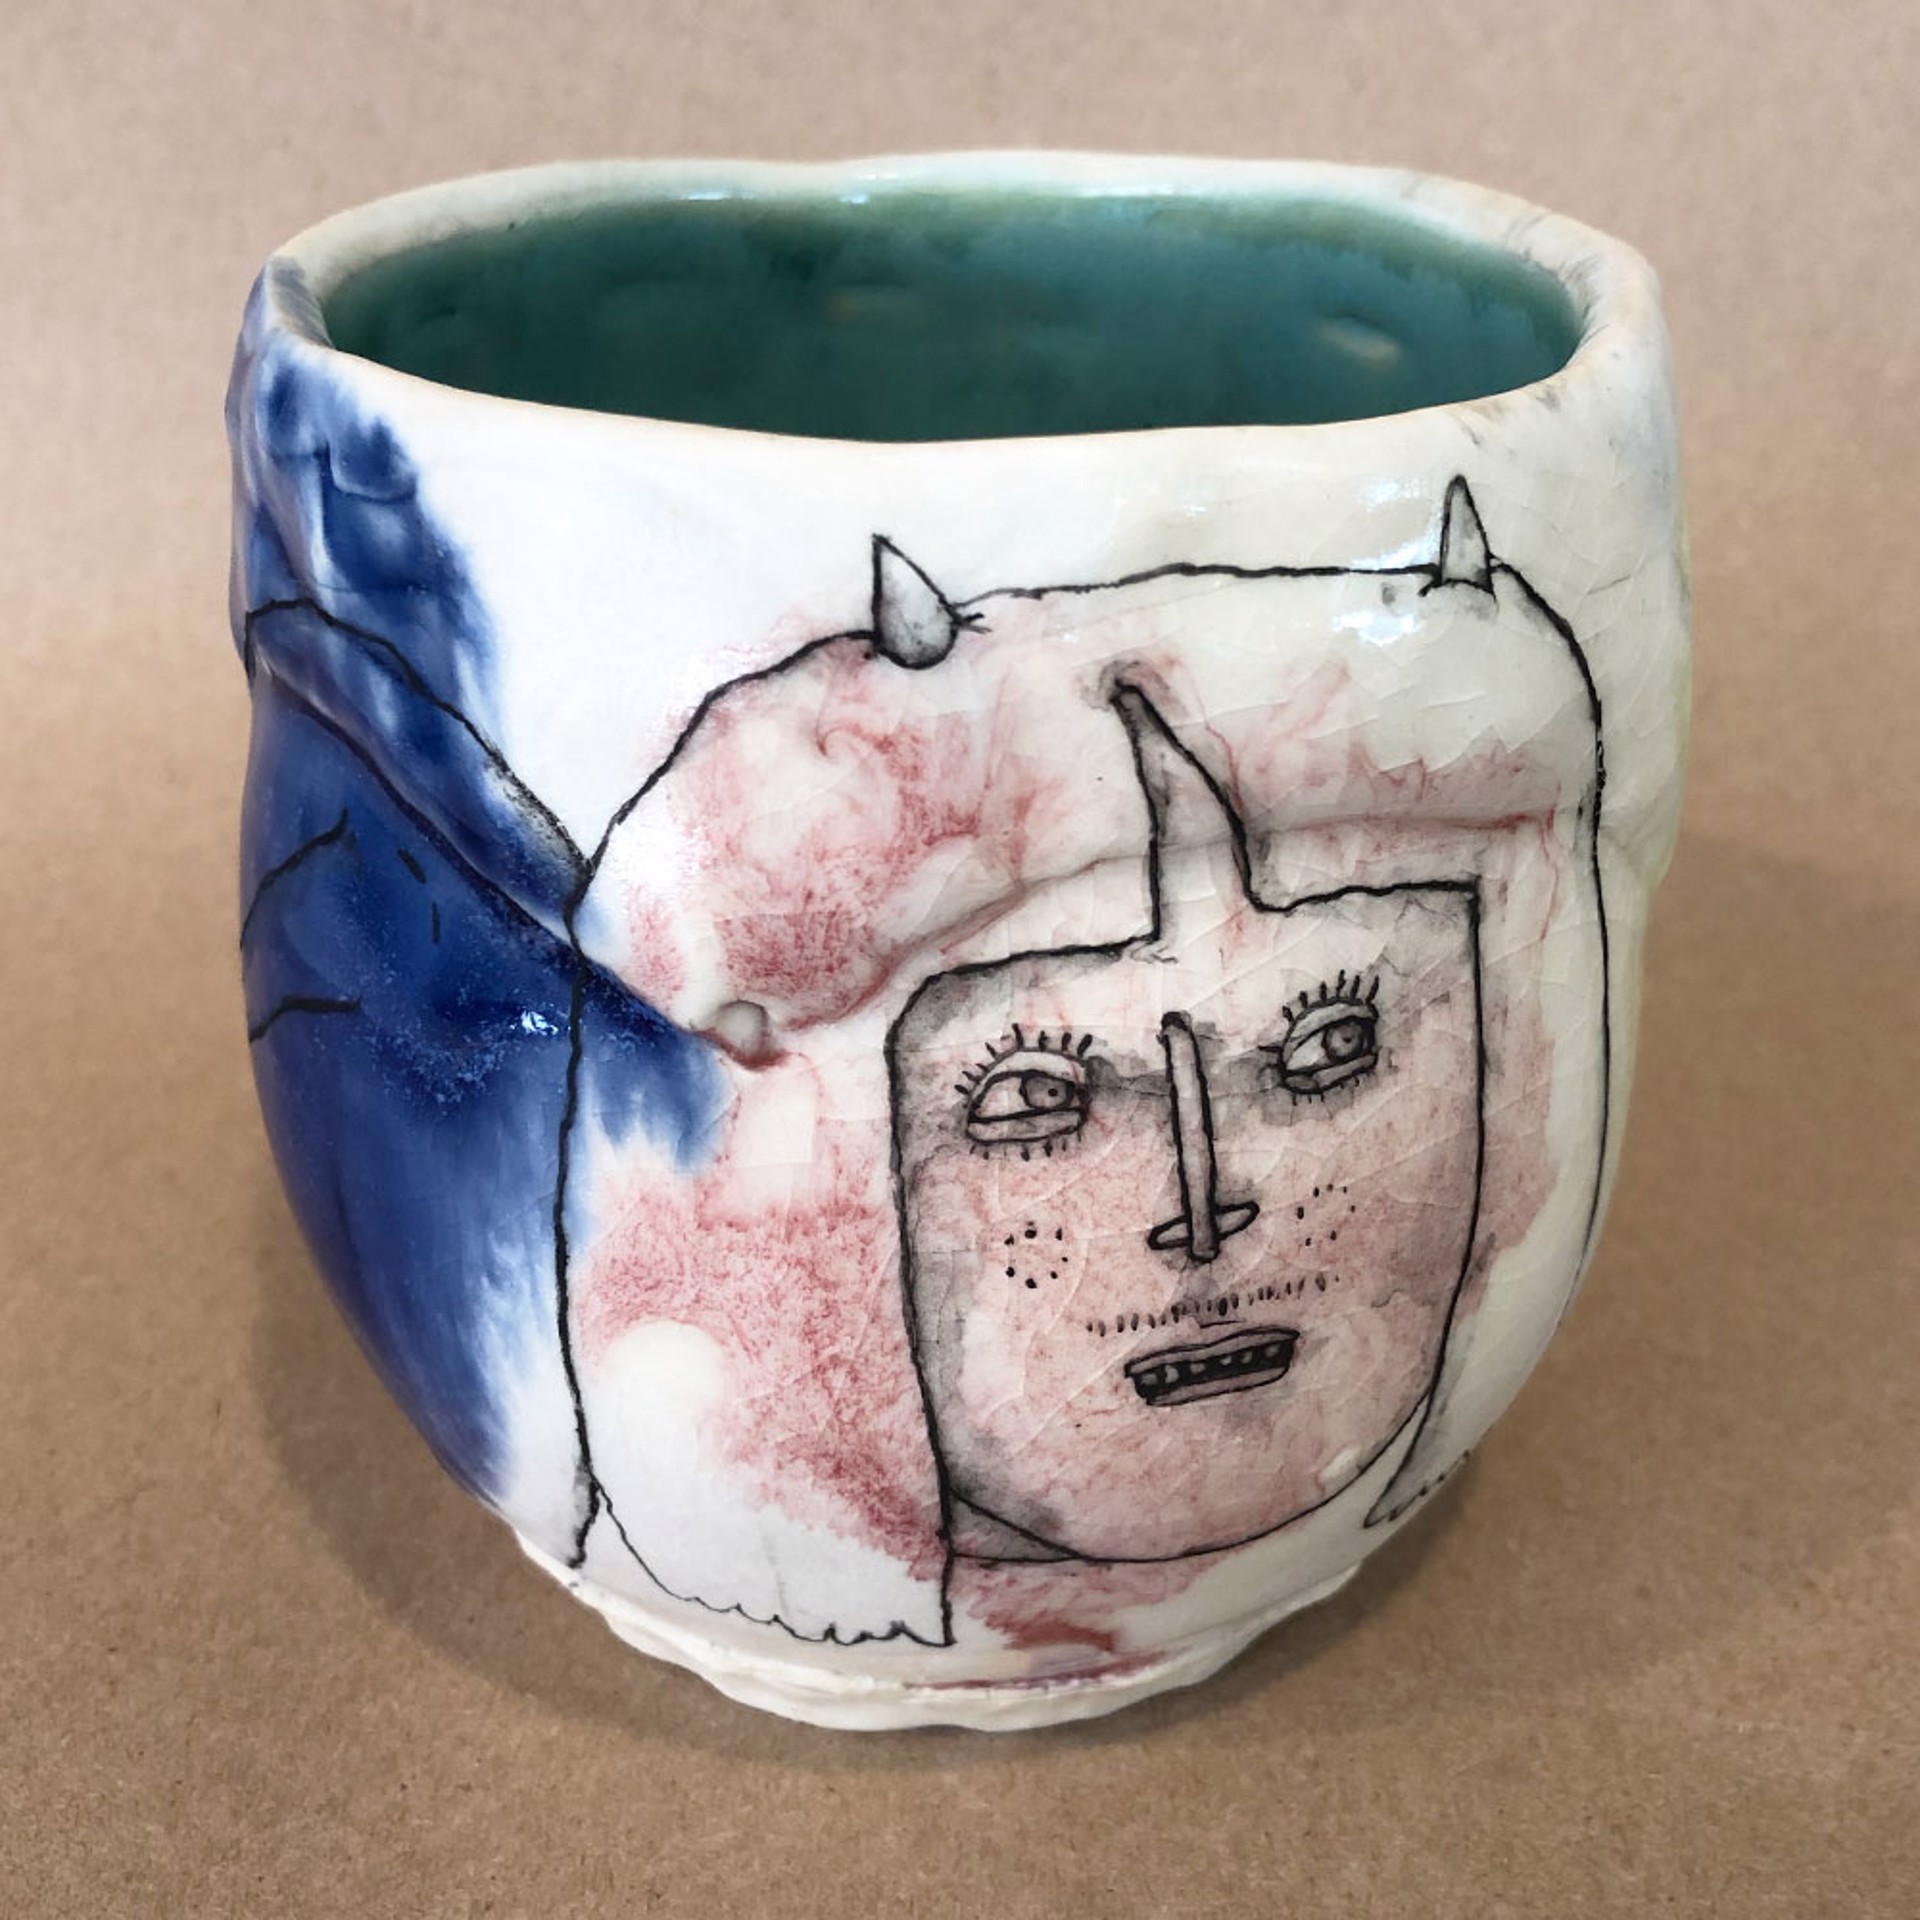 China Clay Cup: Two Faces by Lynne Hobaica